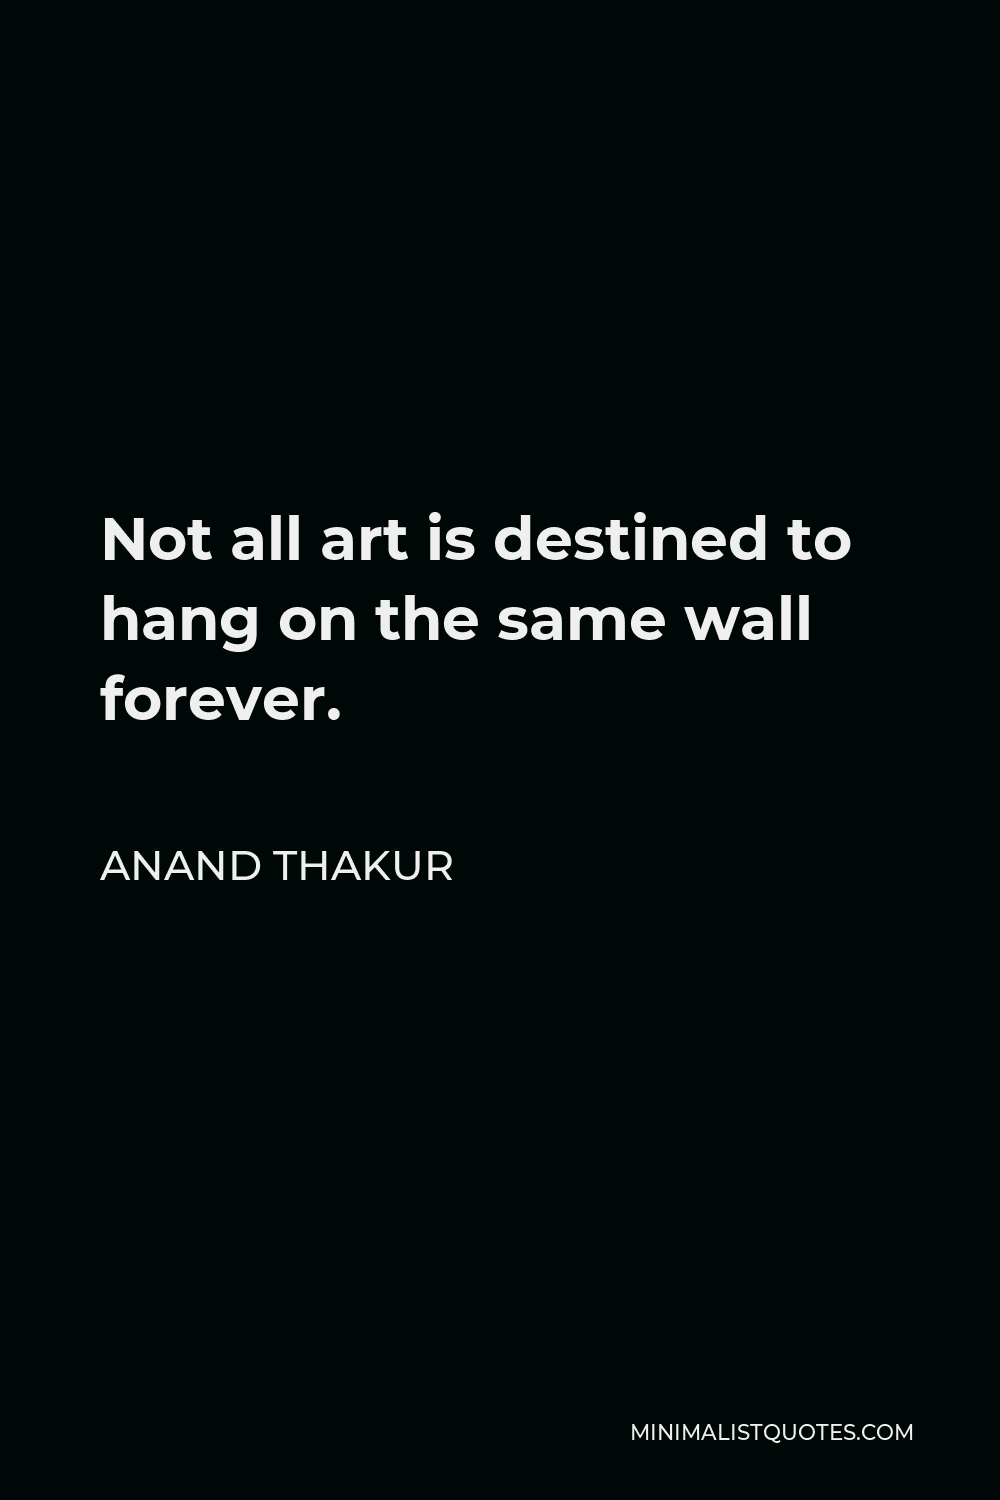 Anand Thakur Quote - Not all art is destined to hang on the same wall forever.